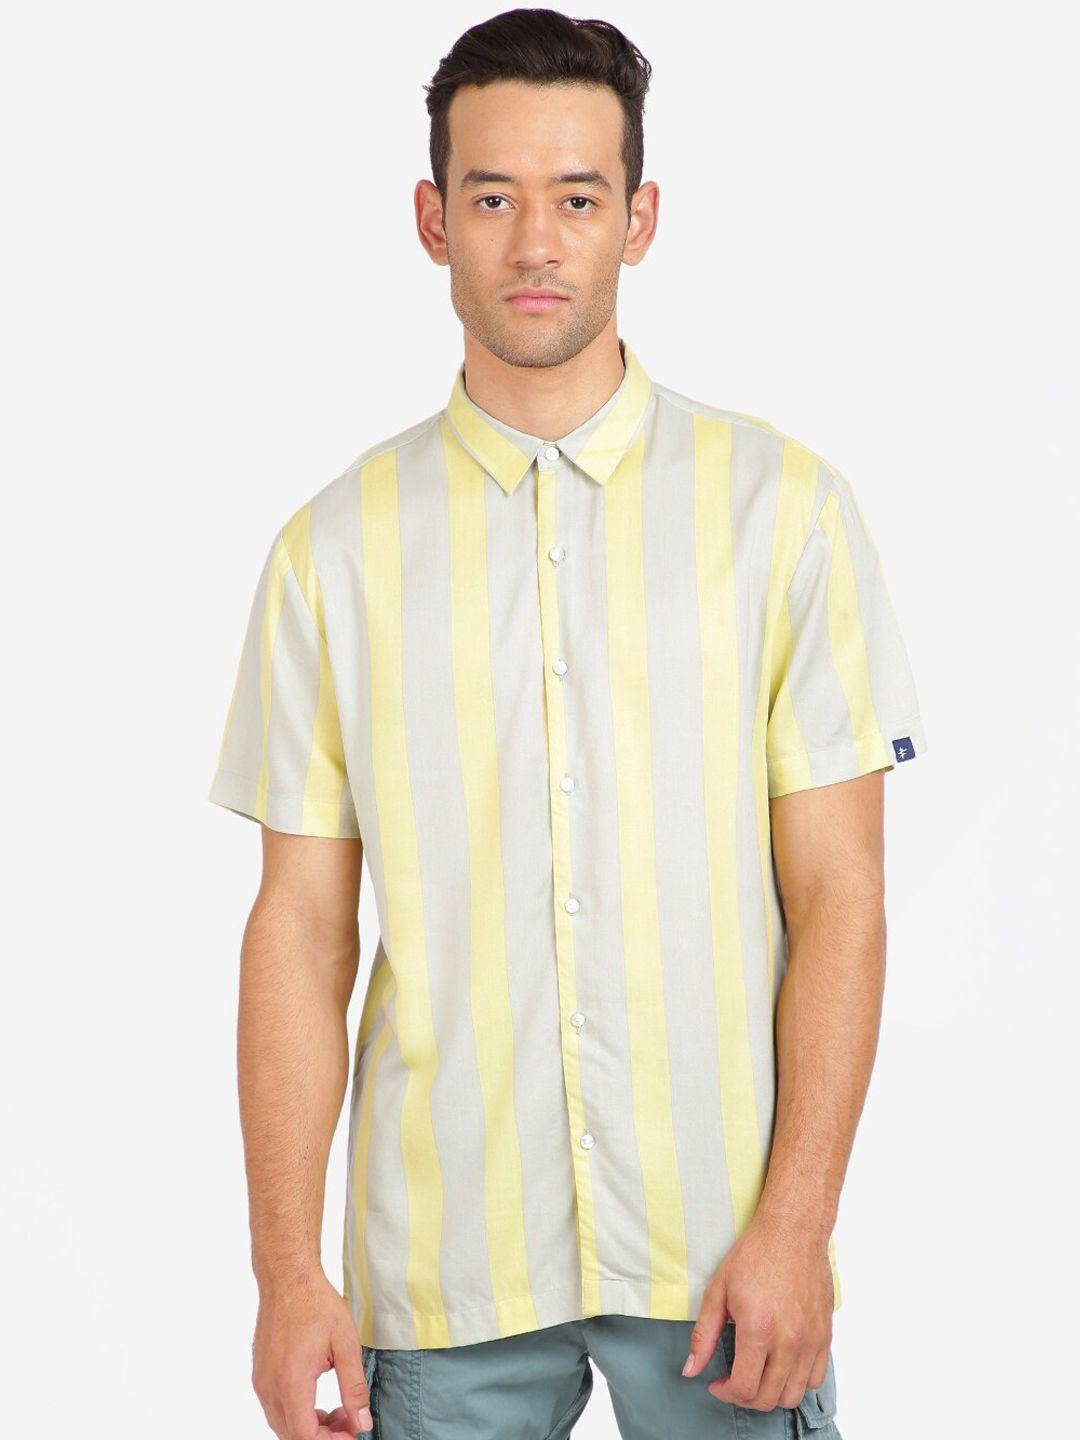 breakbounce men silver-toned & yellow slim fit striped casual shirt